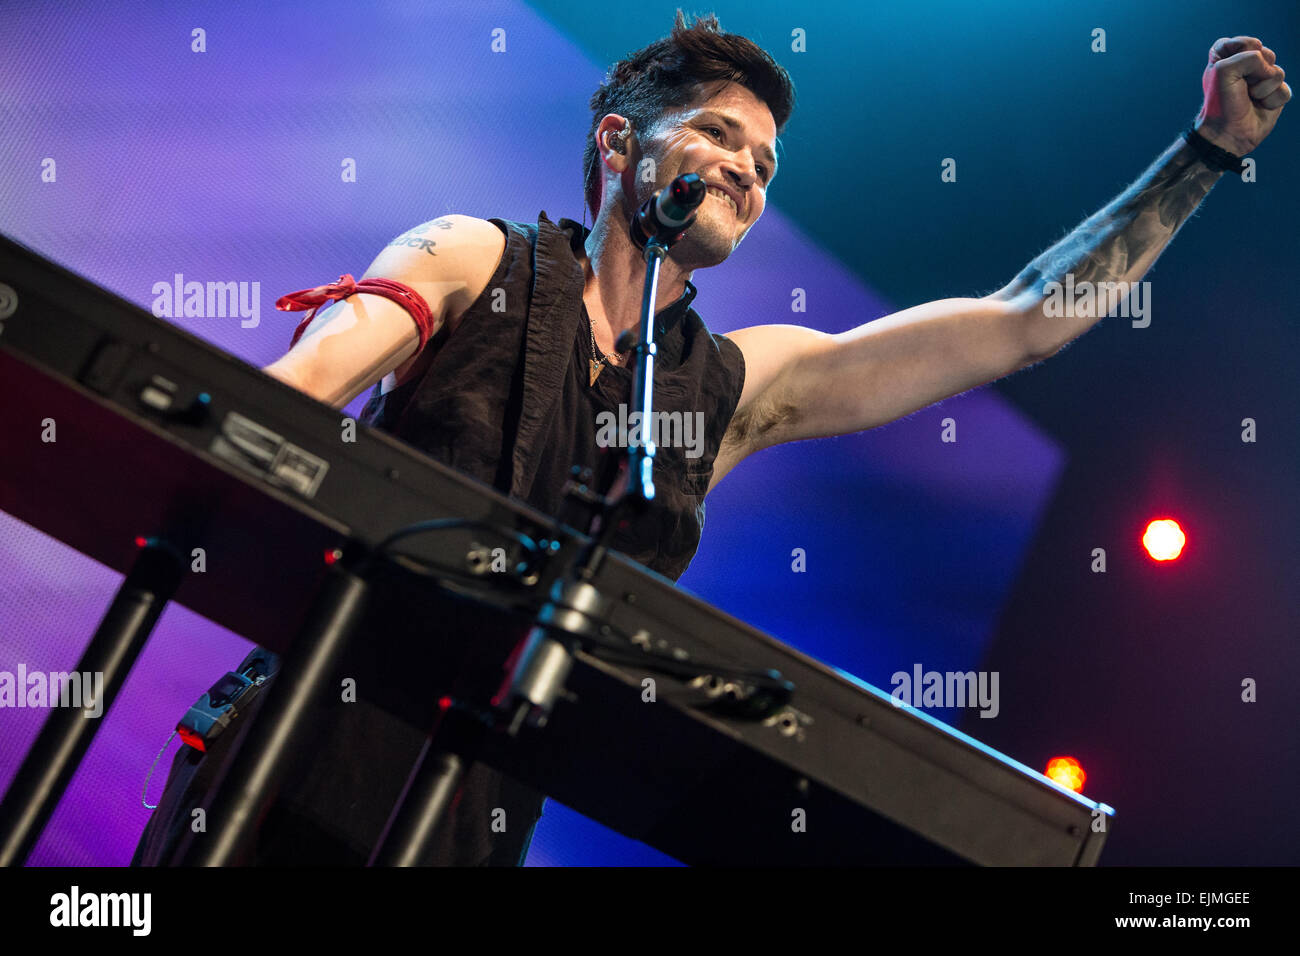 Milan, Italy. 28th March, 2015. The Irish pop rock band THE SCRIPT performs  live at Mediolanum